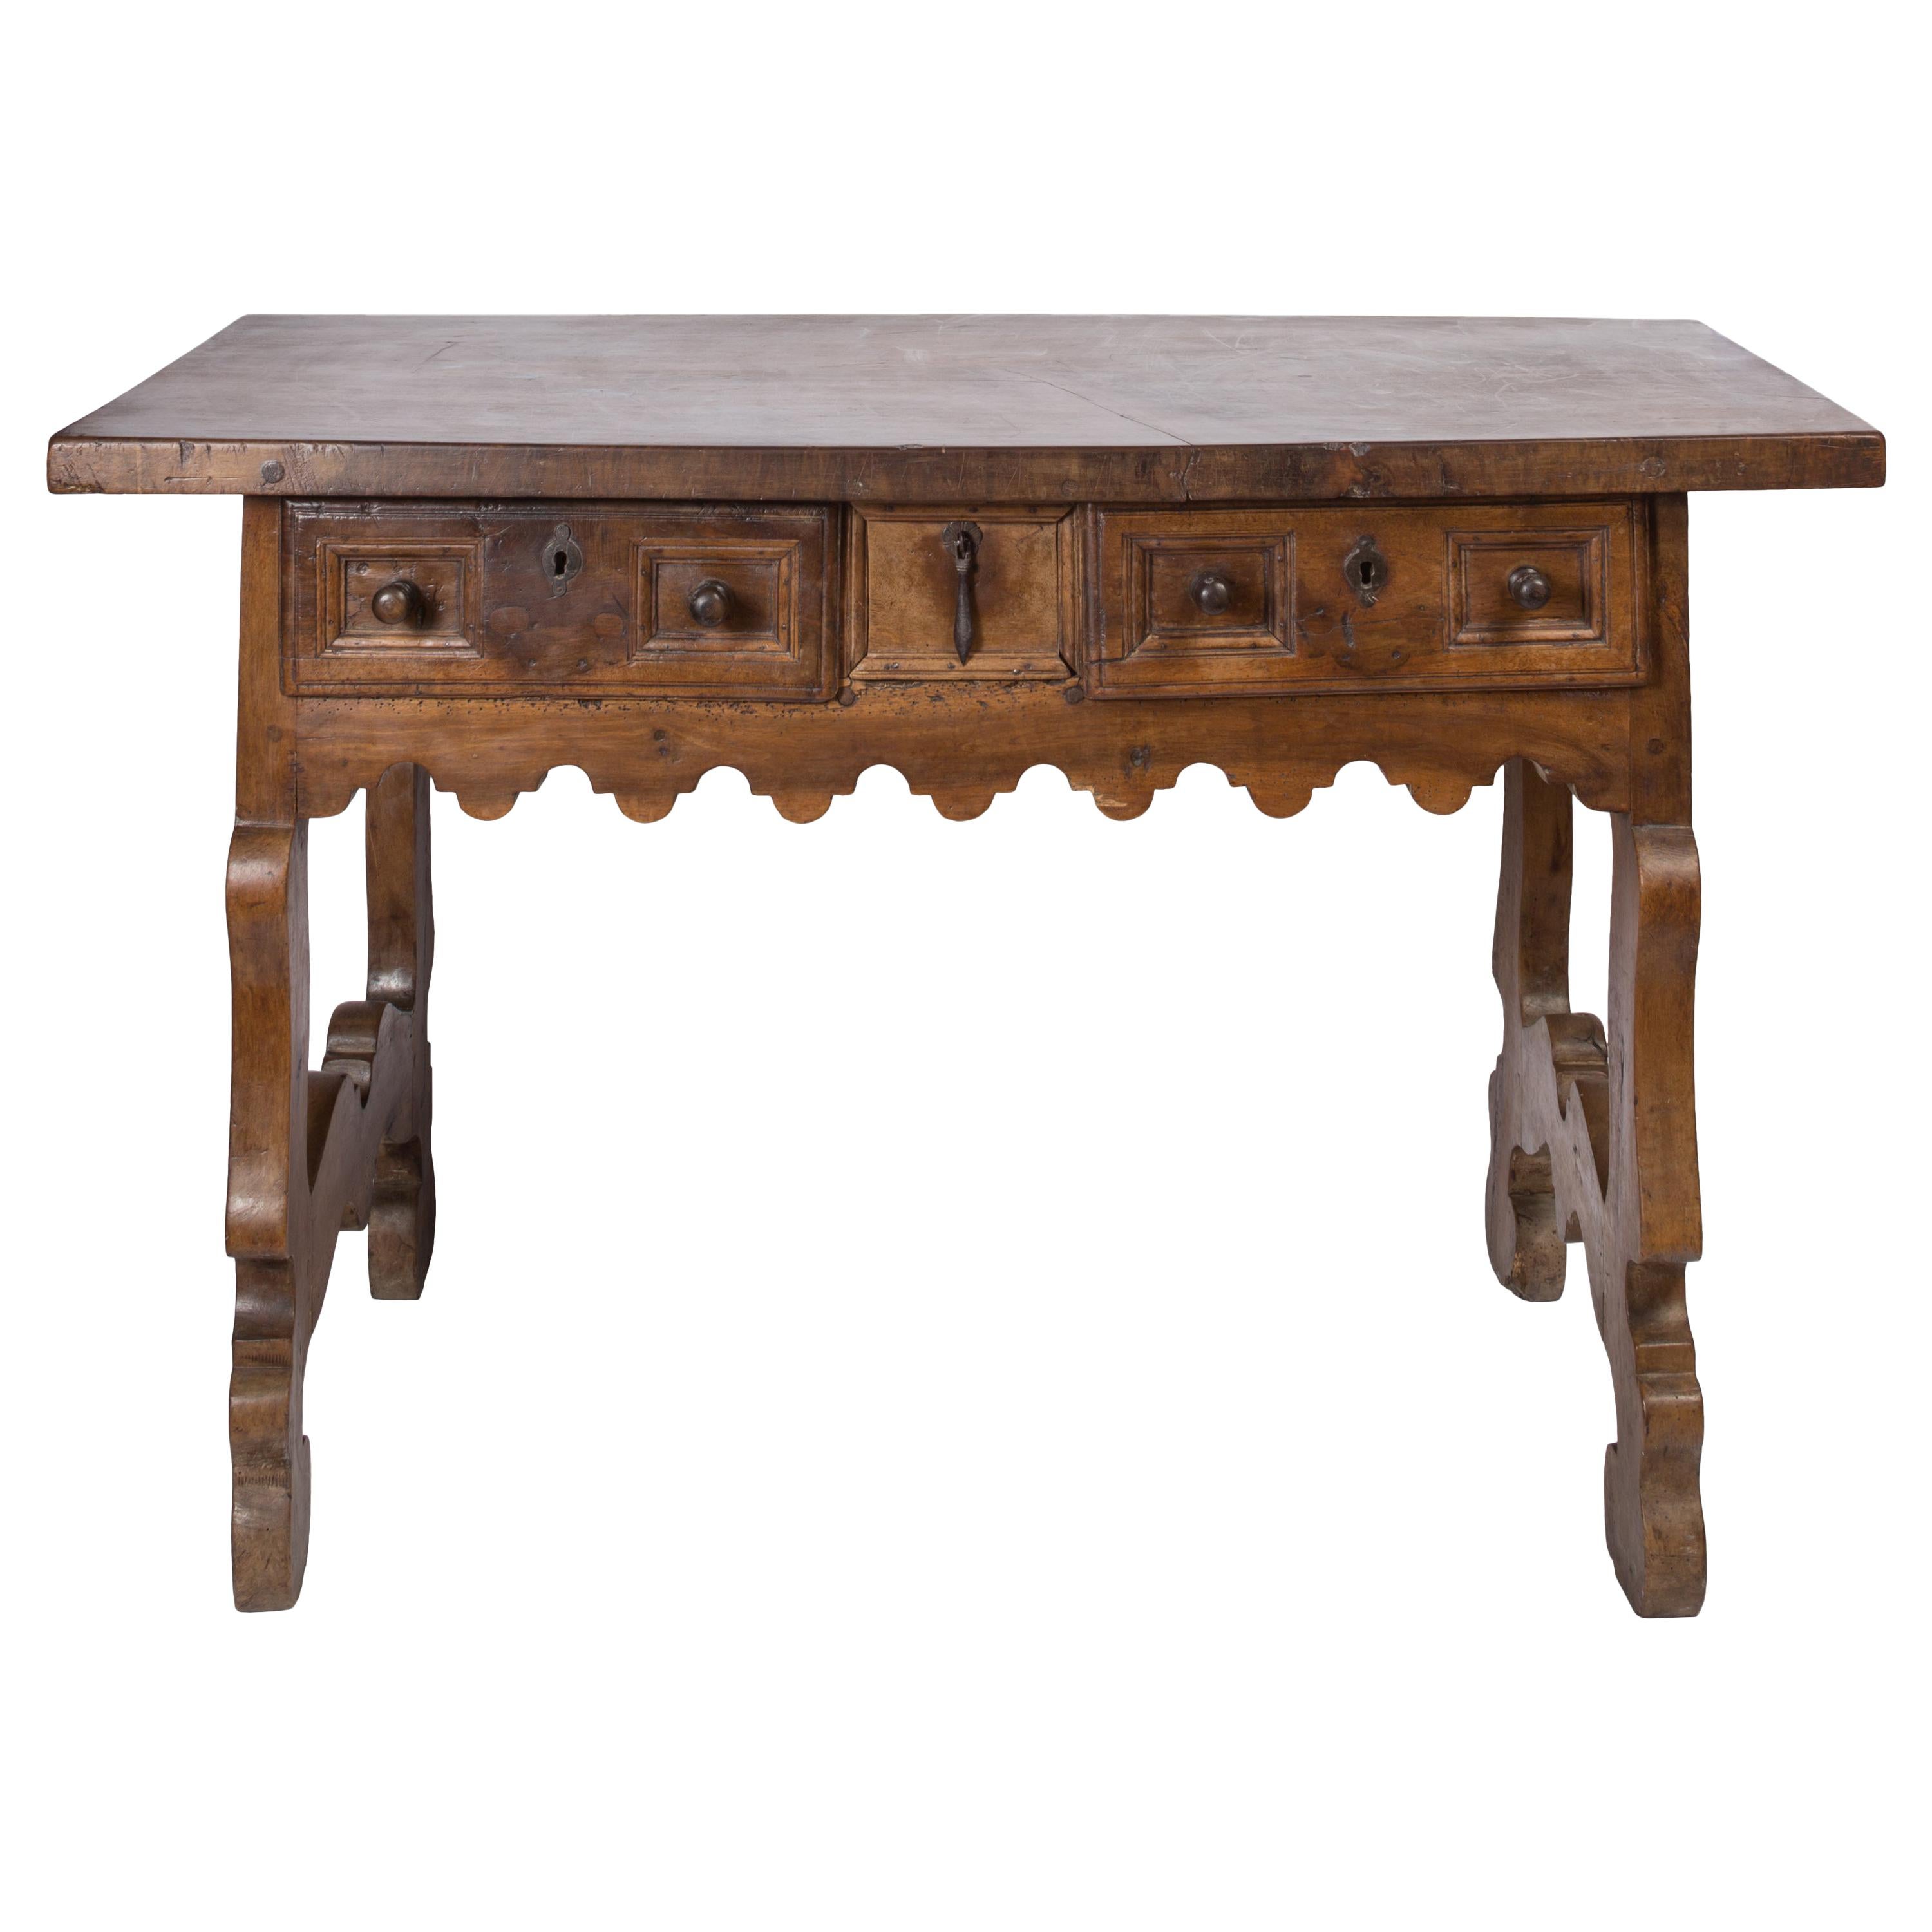 17th Century Rustic Wood Spanish Writing Table with Three Drawers